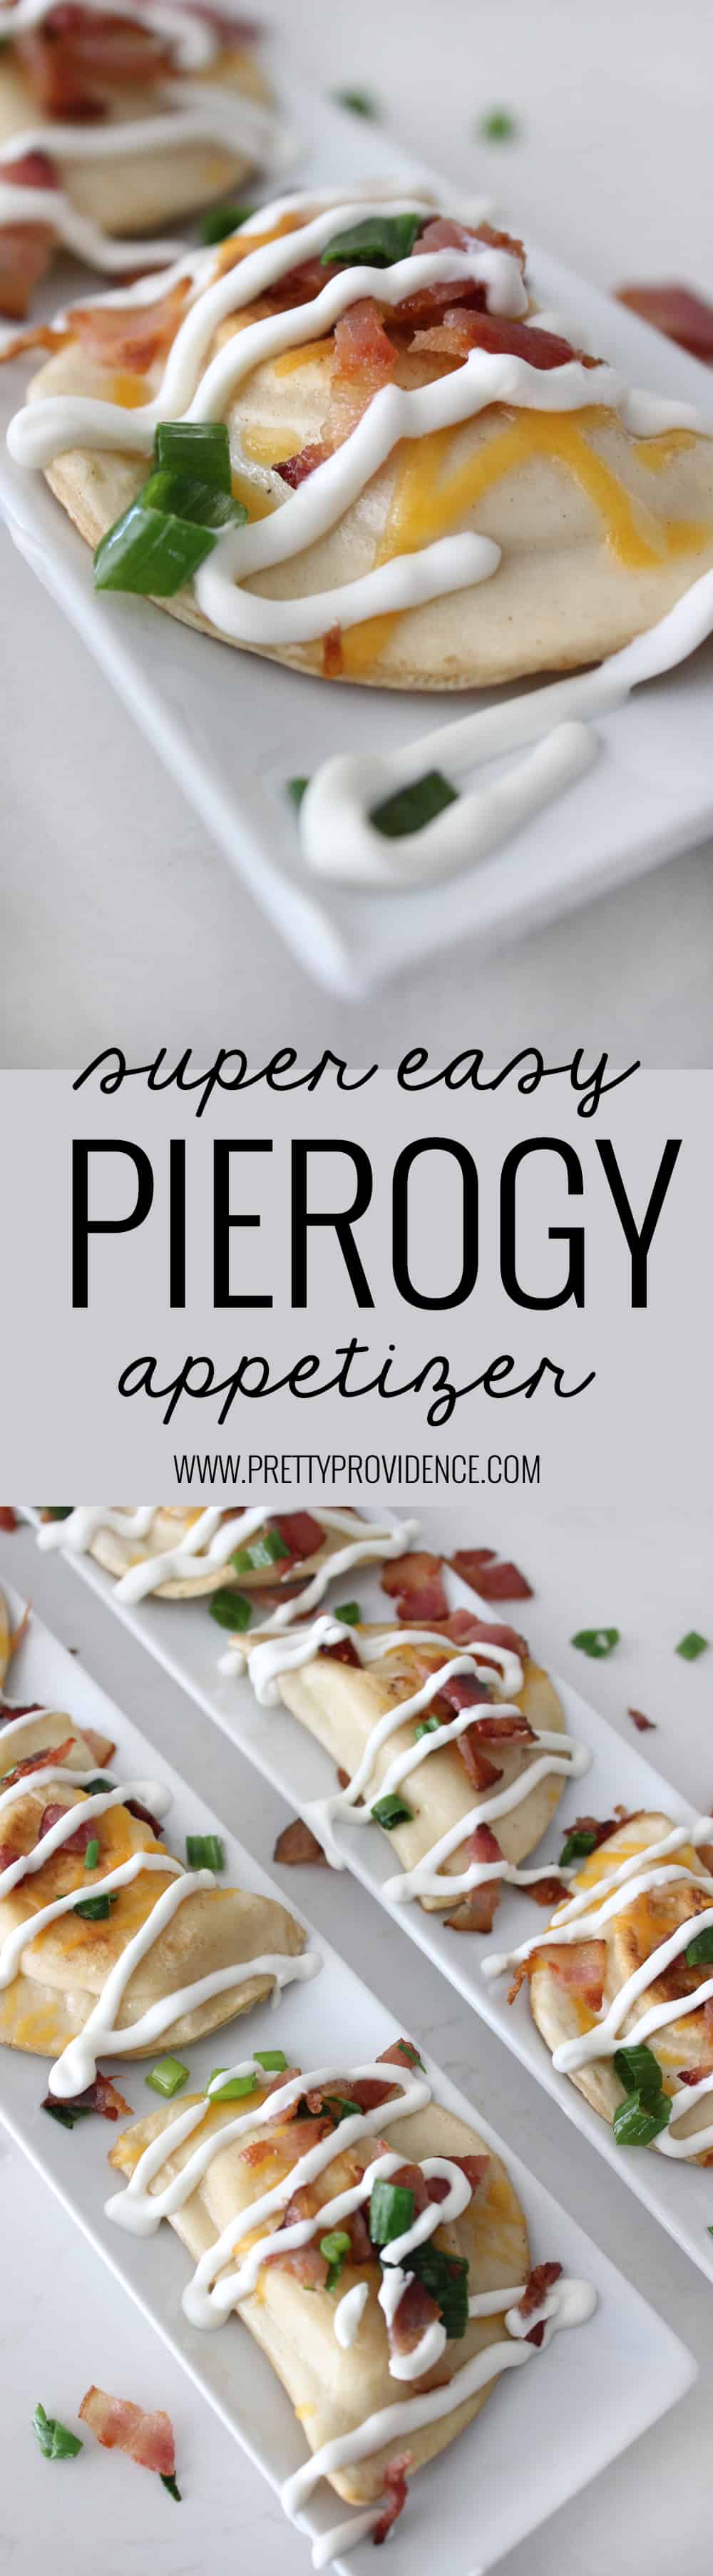 This SUPER EASY Pierogy appetizer is so delicious! Perfect for watching the game with friends or making a date night in of your favorite TV series! 